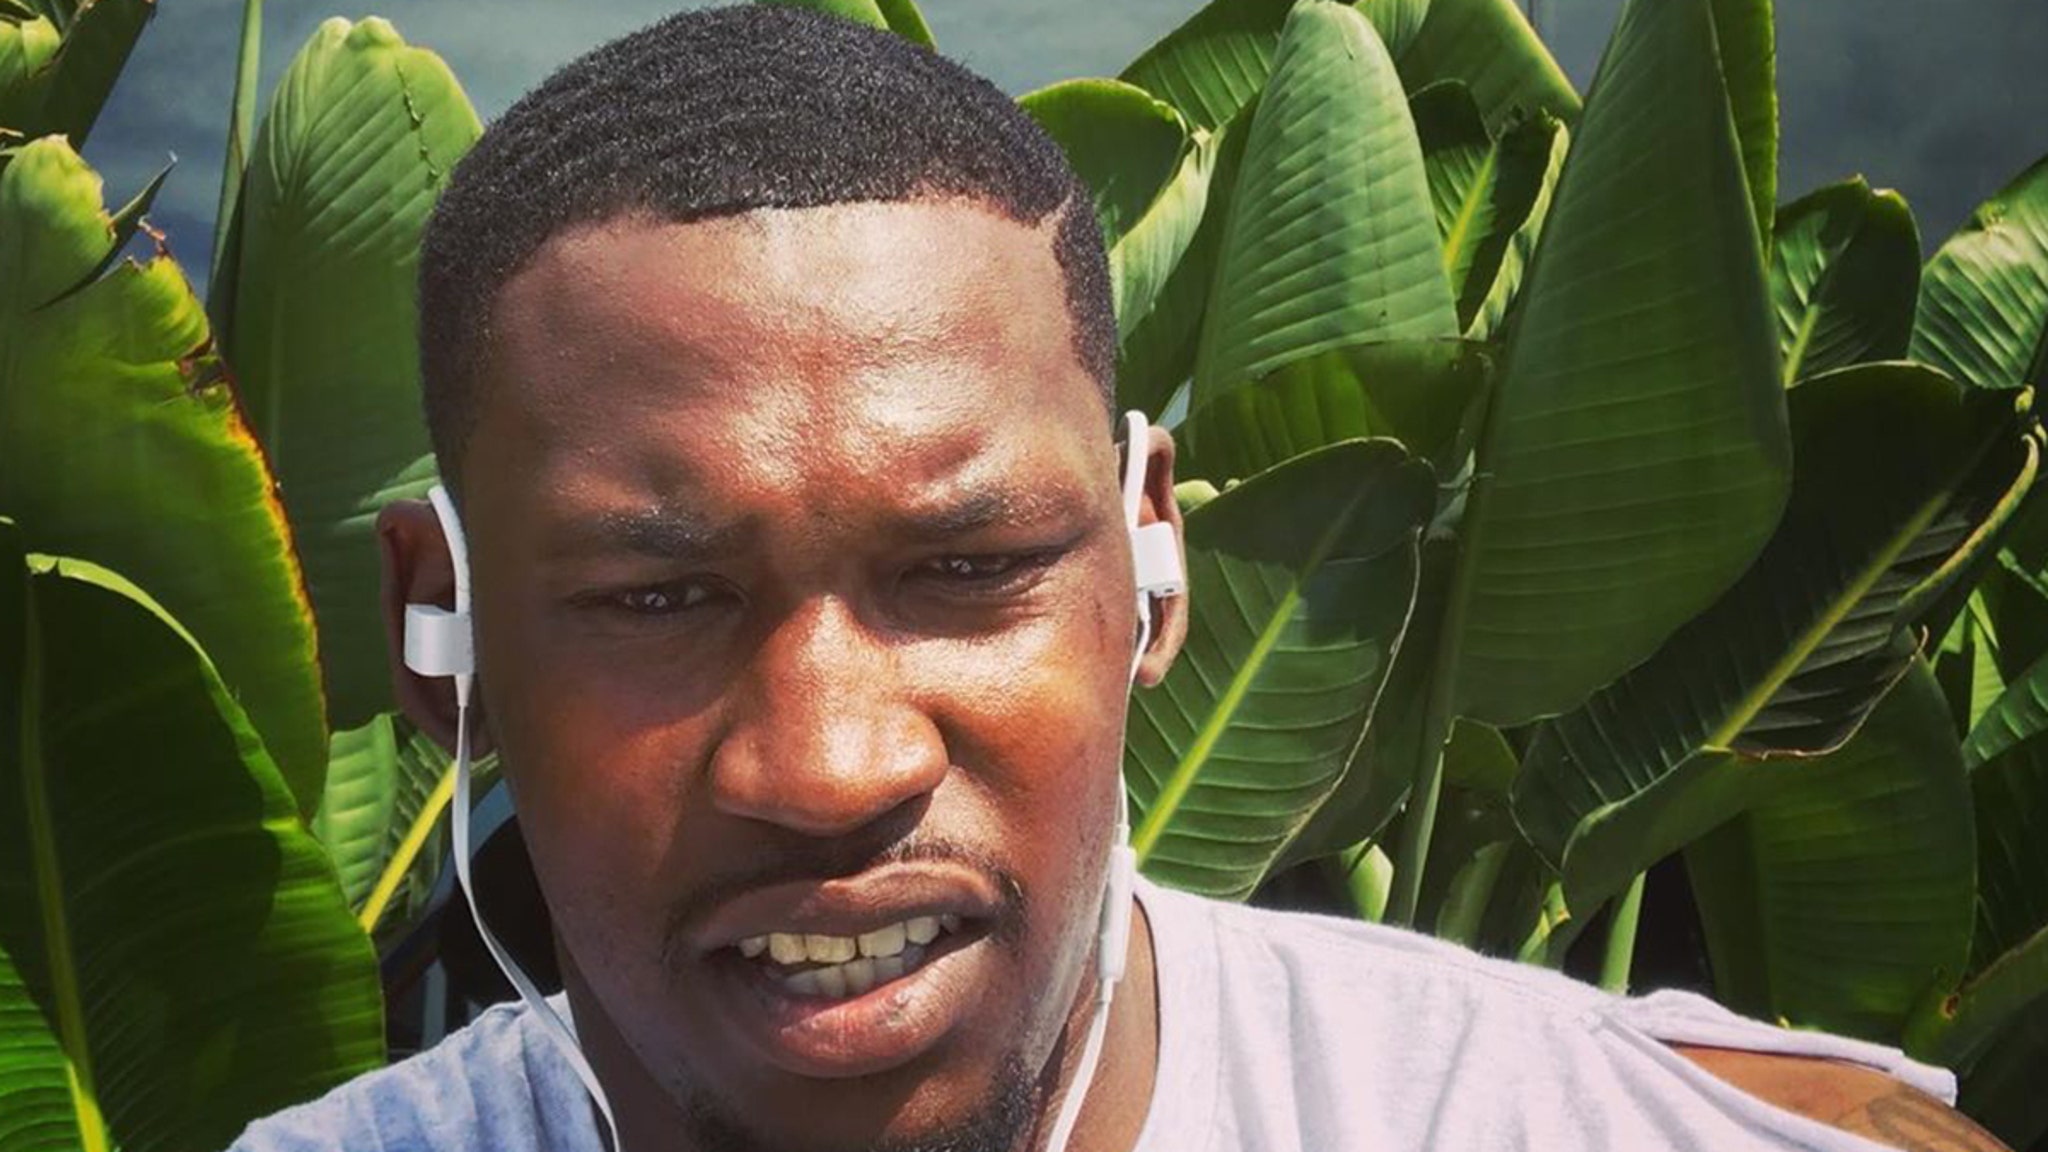 Aldon Smith Says He's Sober and Supported on 30th Birthday